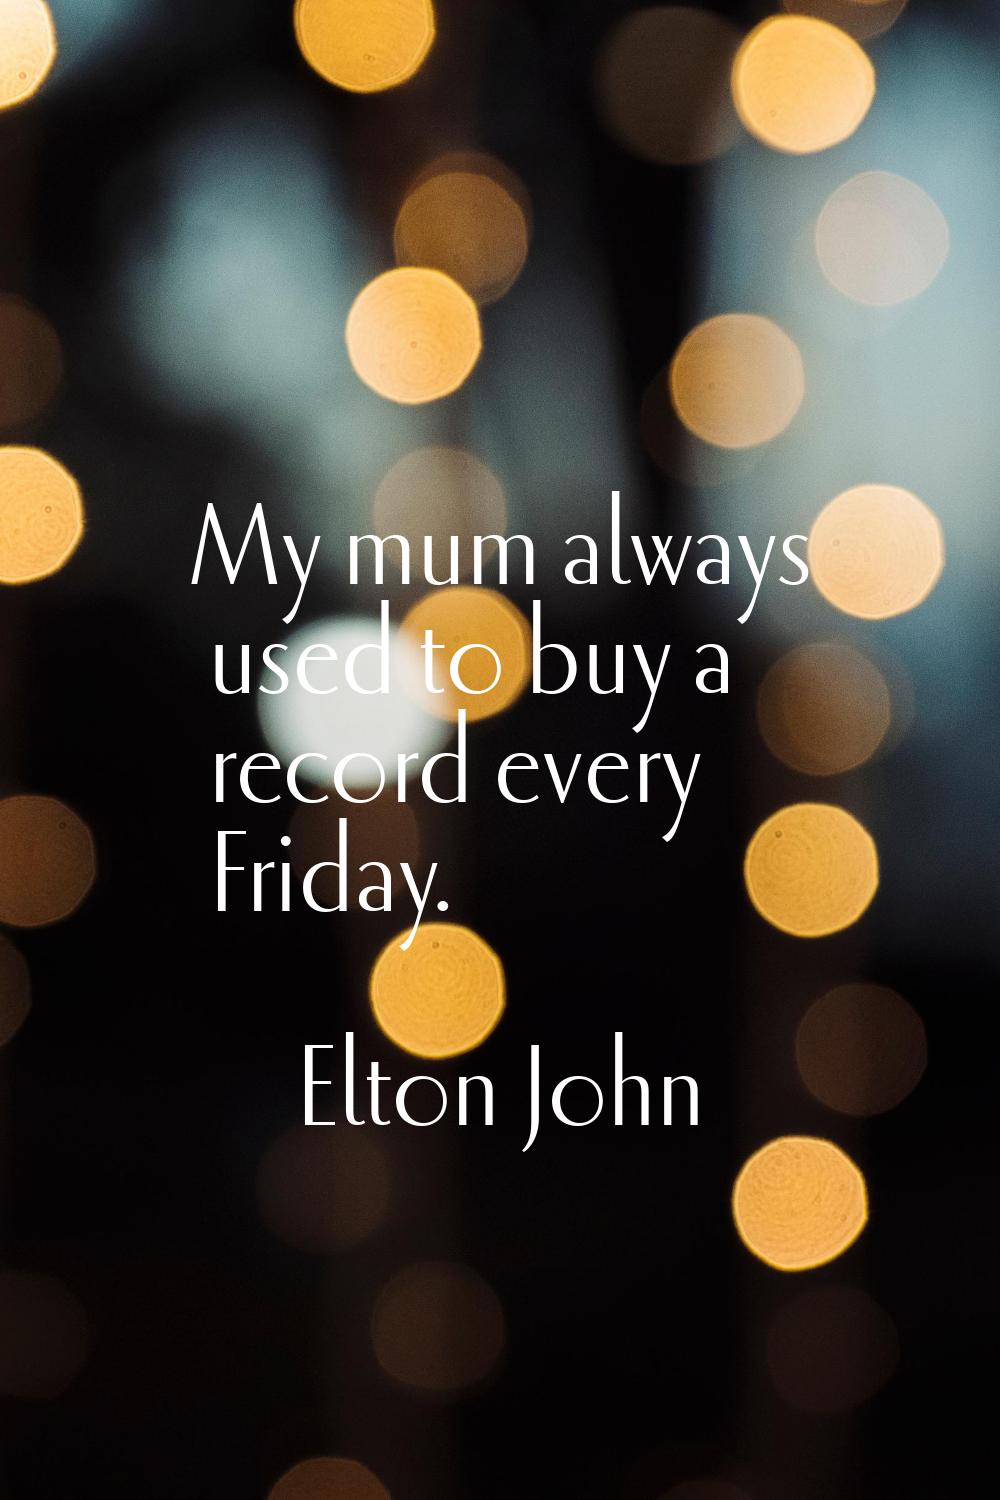 My mum always used to buy a record every Friday.